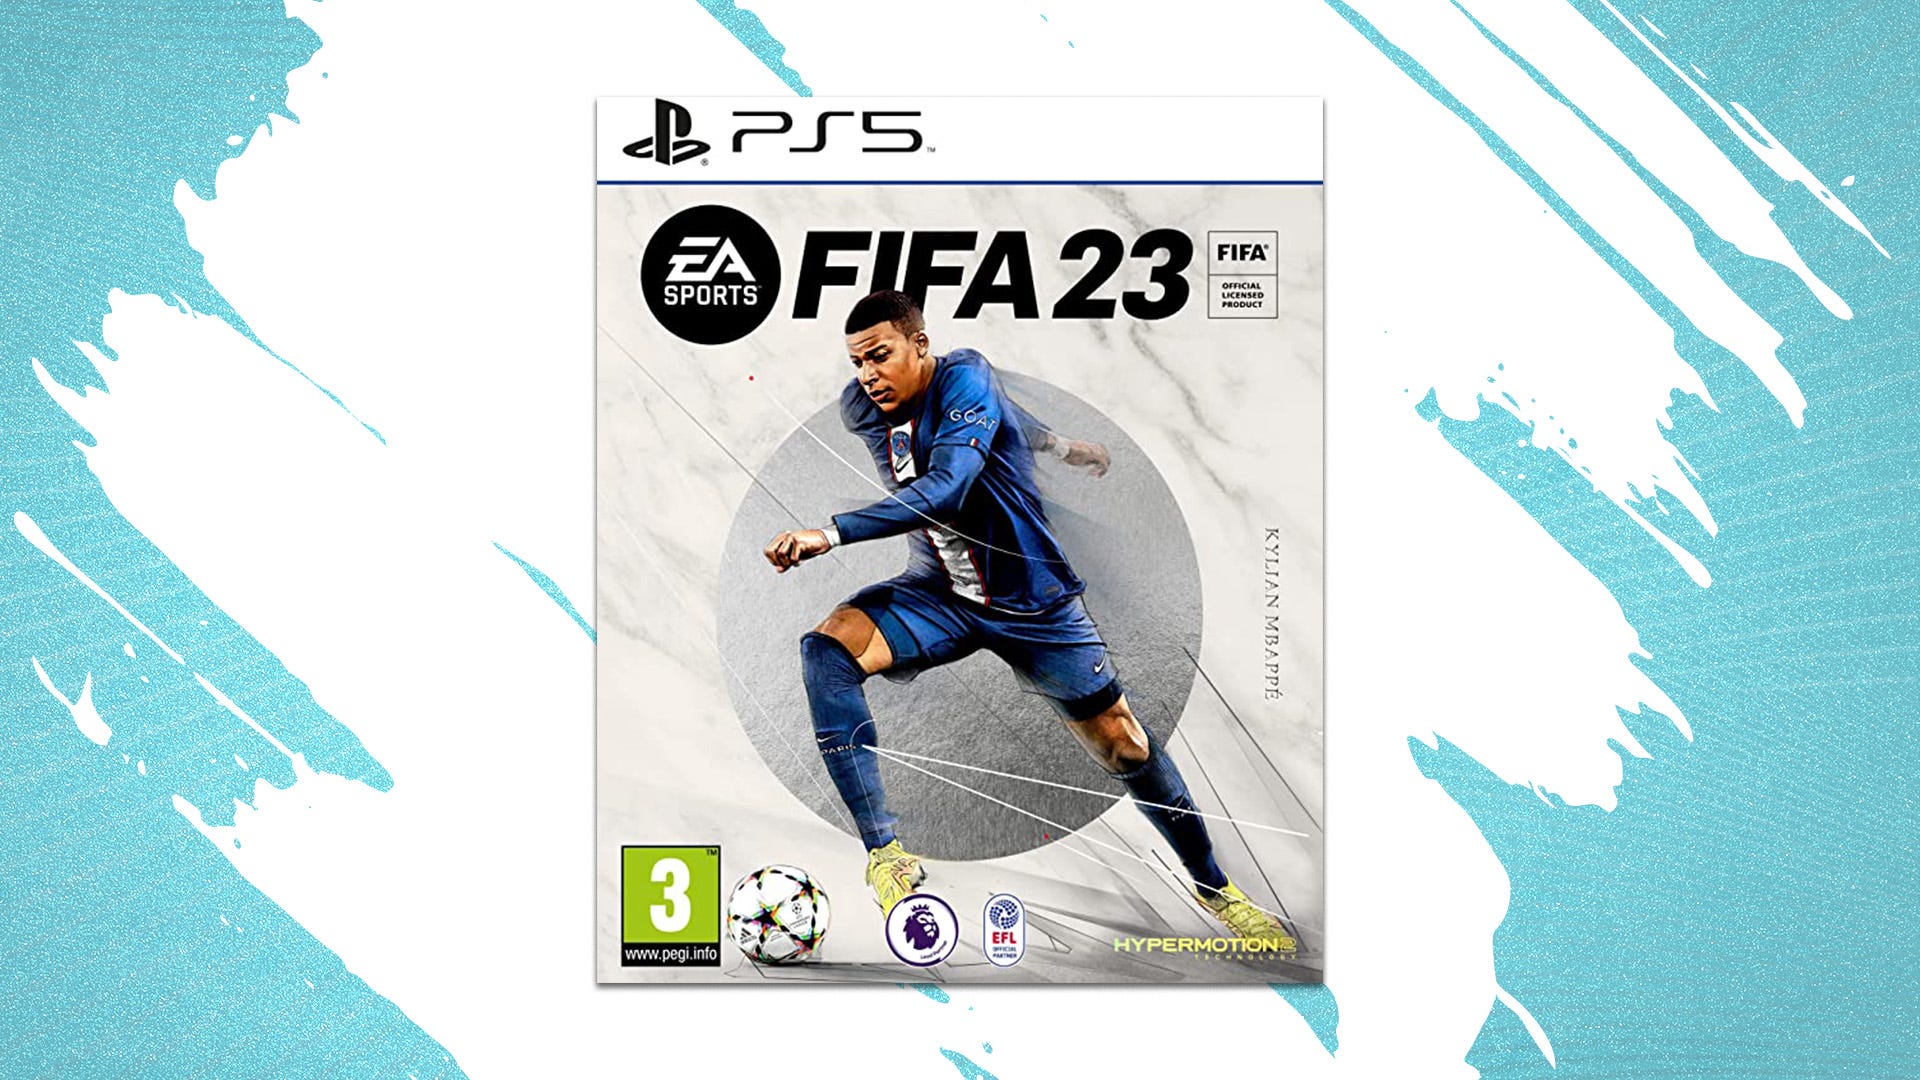 How to buy FIFA 23 in Israel on the bulletin board